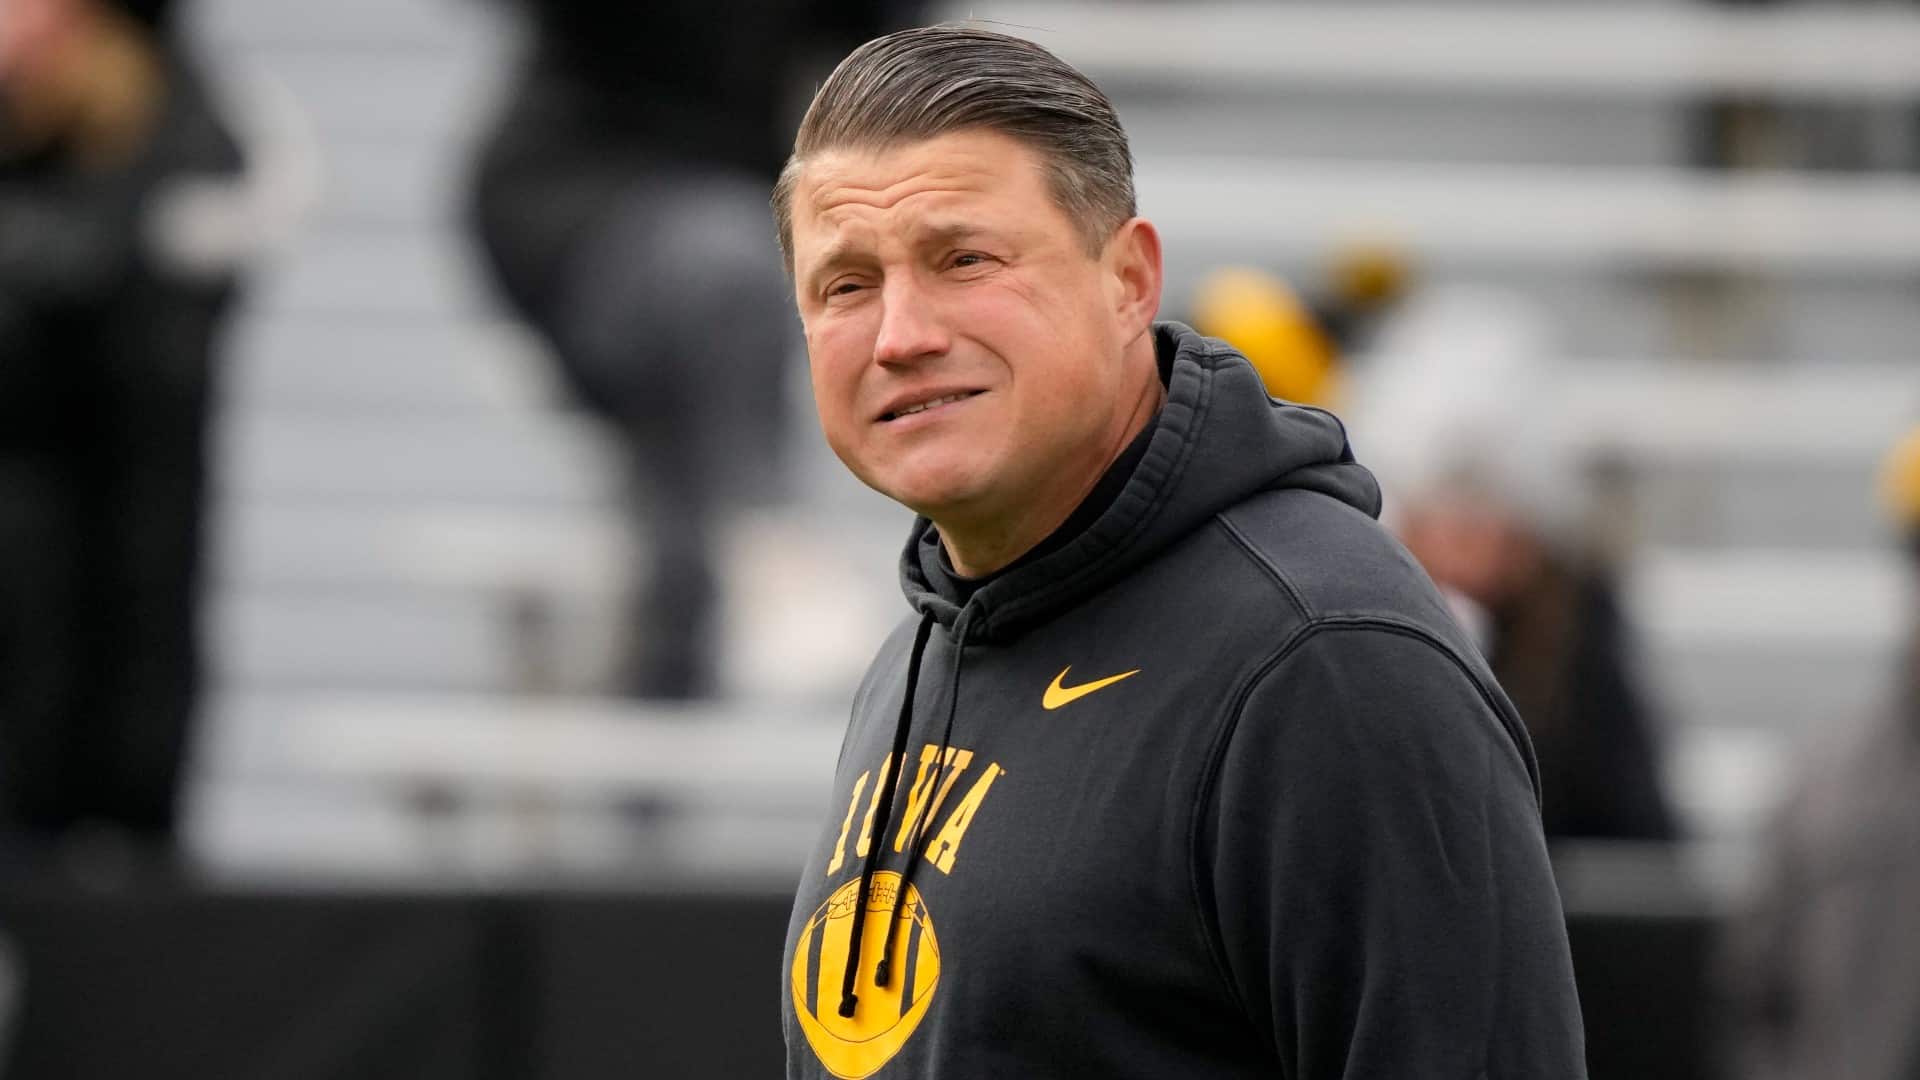 Brian Ferentz must score 25 points per game to keep his job 